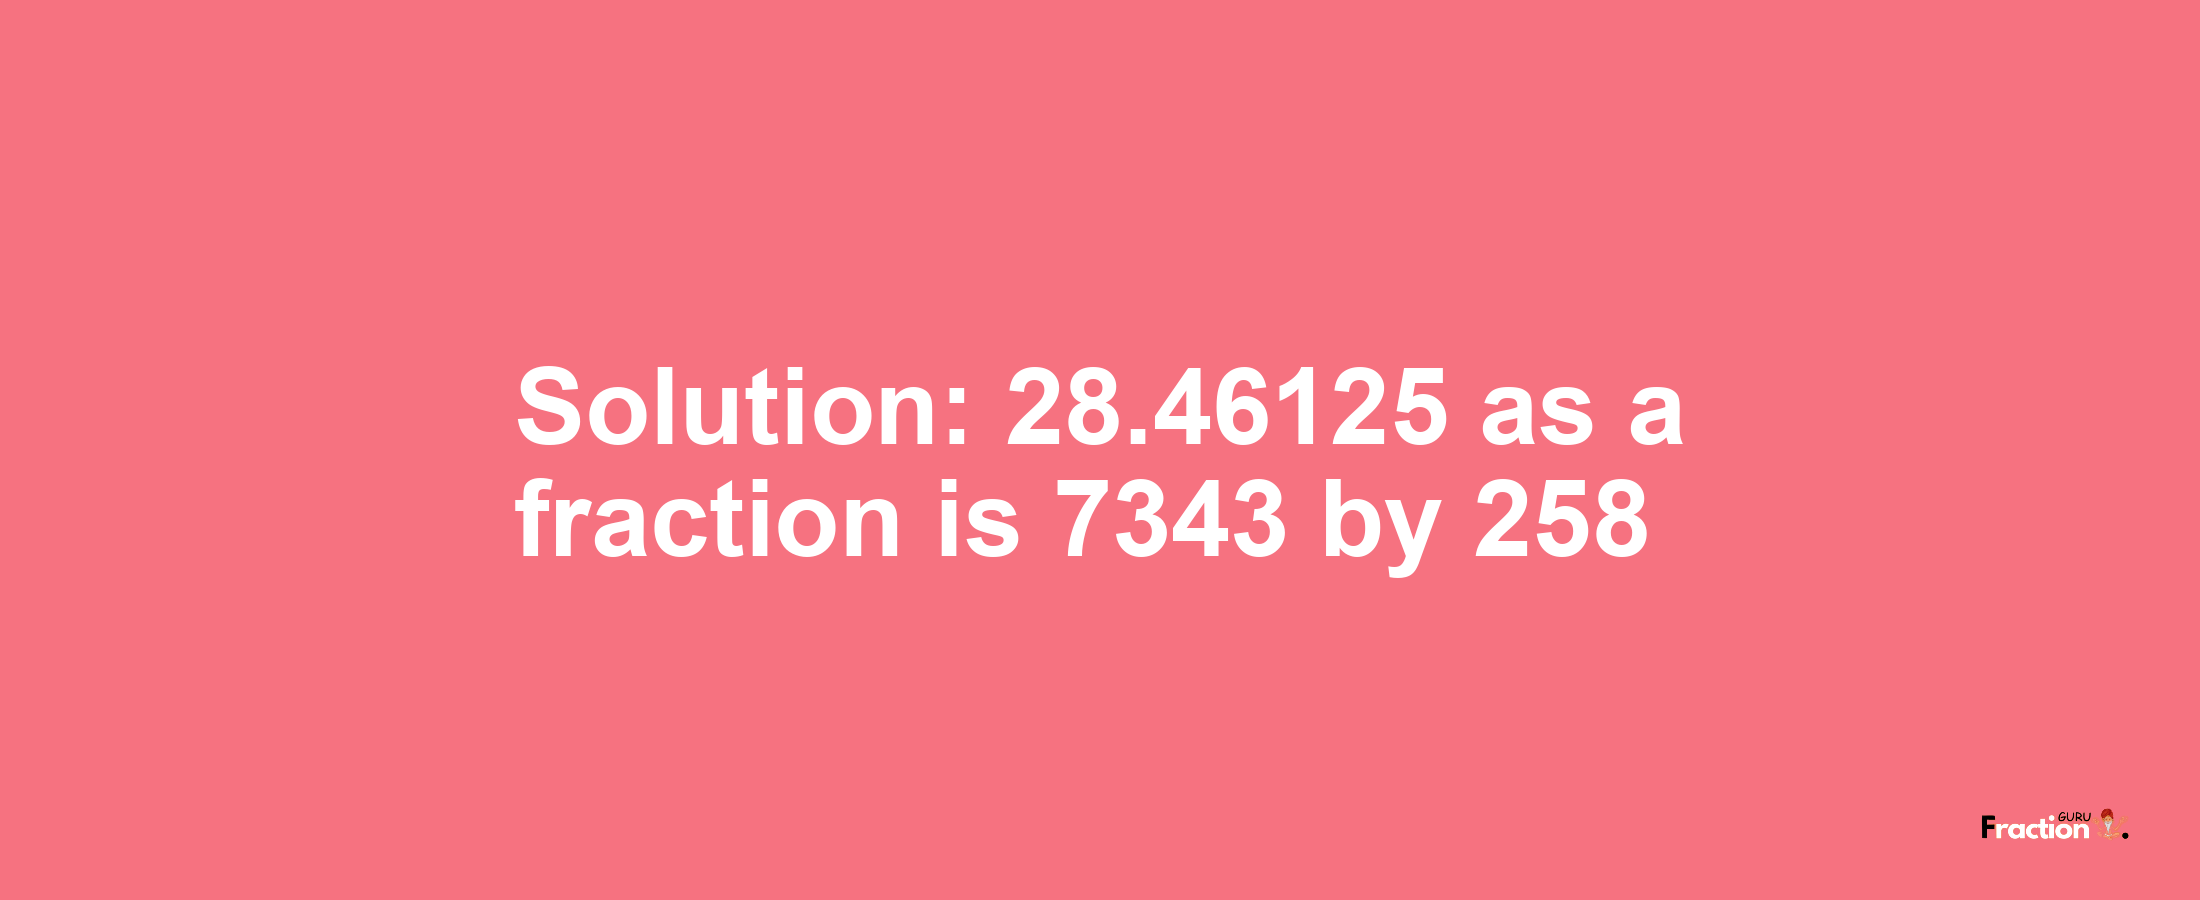 Solution:28.46125 as a fraction is 7343/258